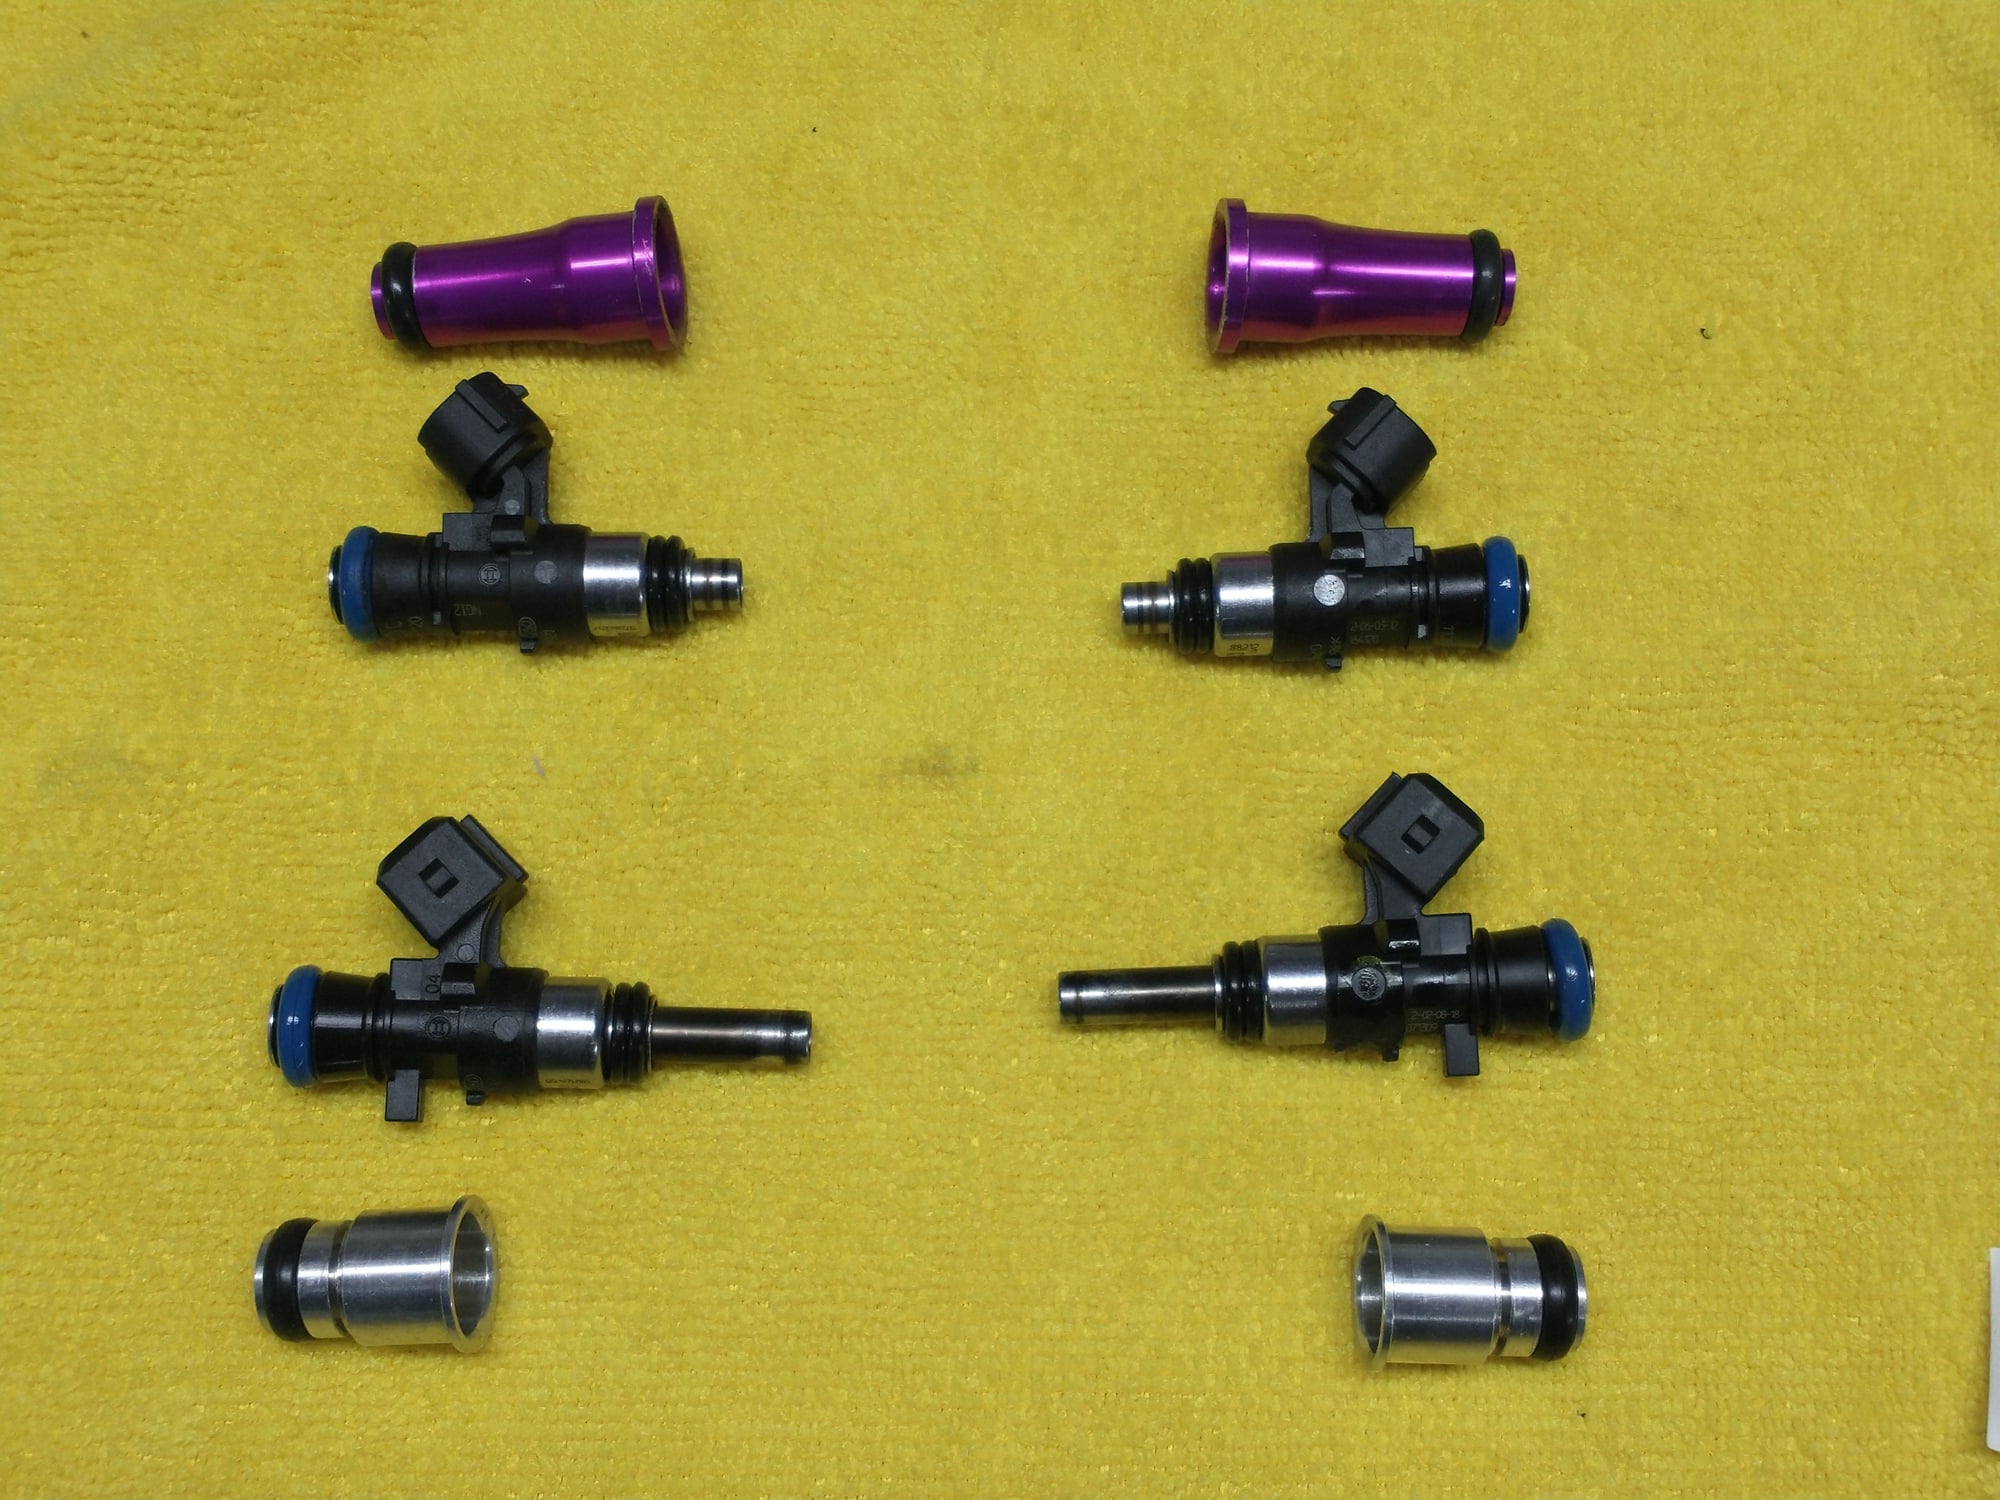 Engine - Intake/Fuel - Genuine Bosch Fuel Injector Set, 2x 900cc/min Primary and 2x 2100 cc/min Secondaries - Used - 1978 to 2001 Mazda RX-7 - 2004 to 2012 Mazda RX-8 - Elkton, MD 21921, United States